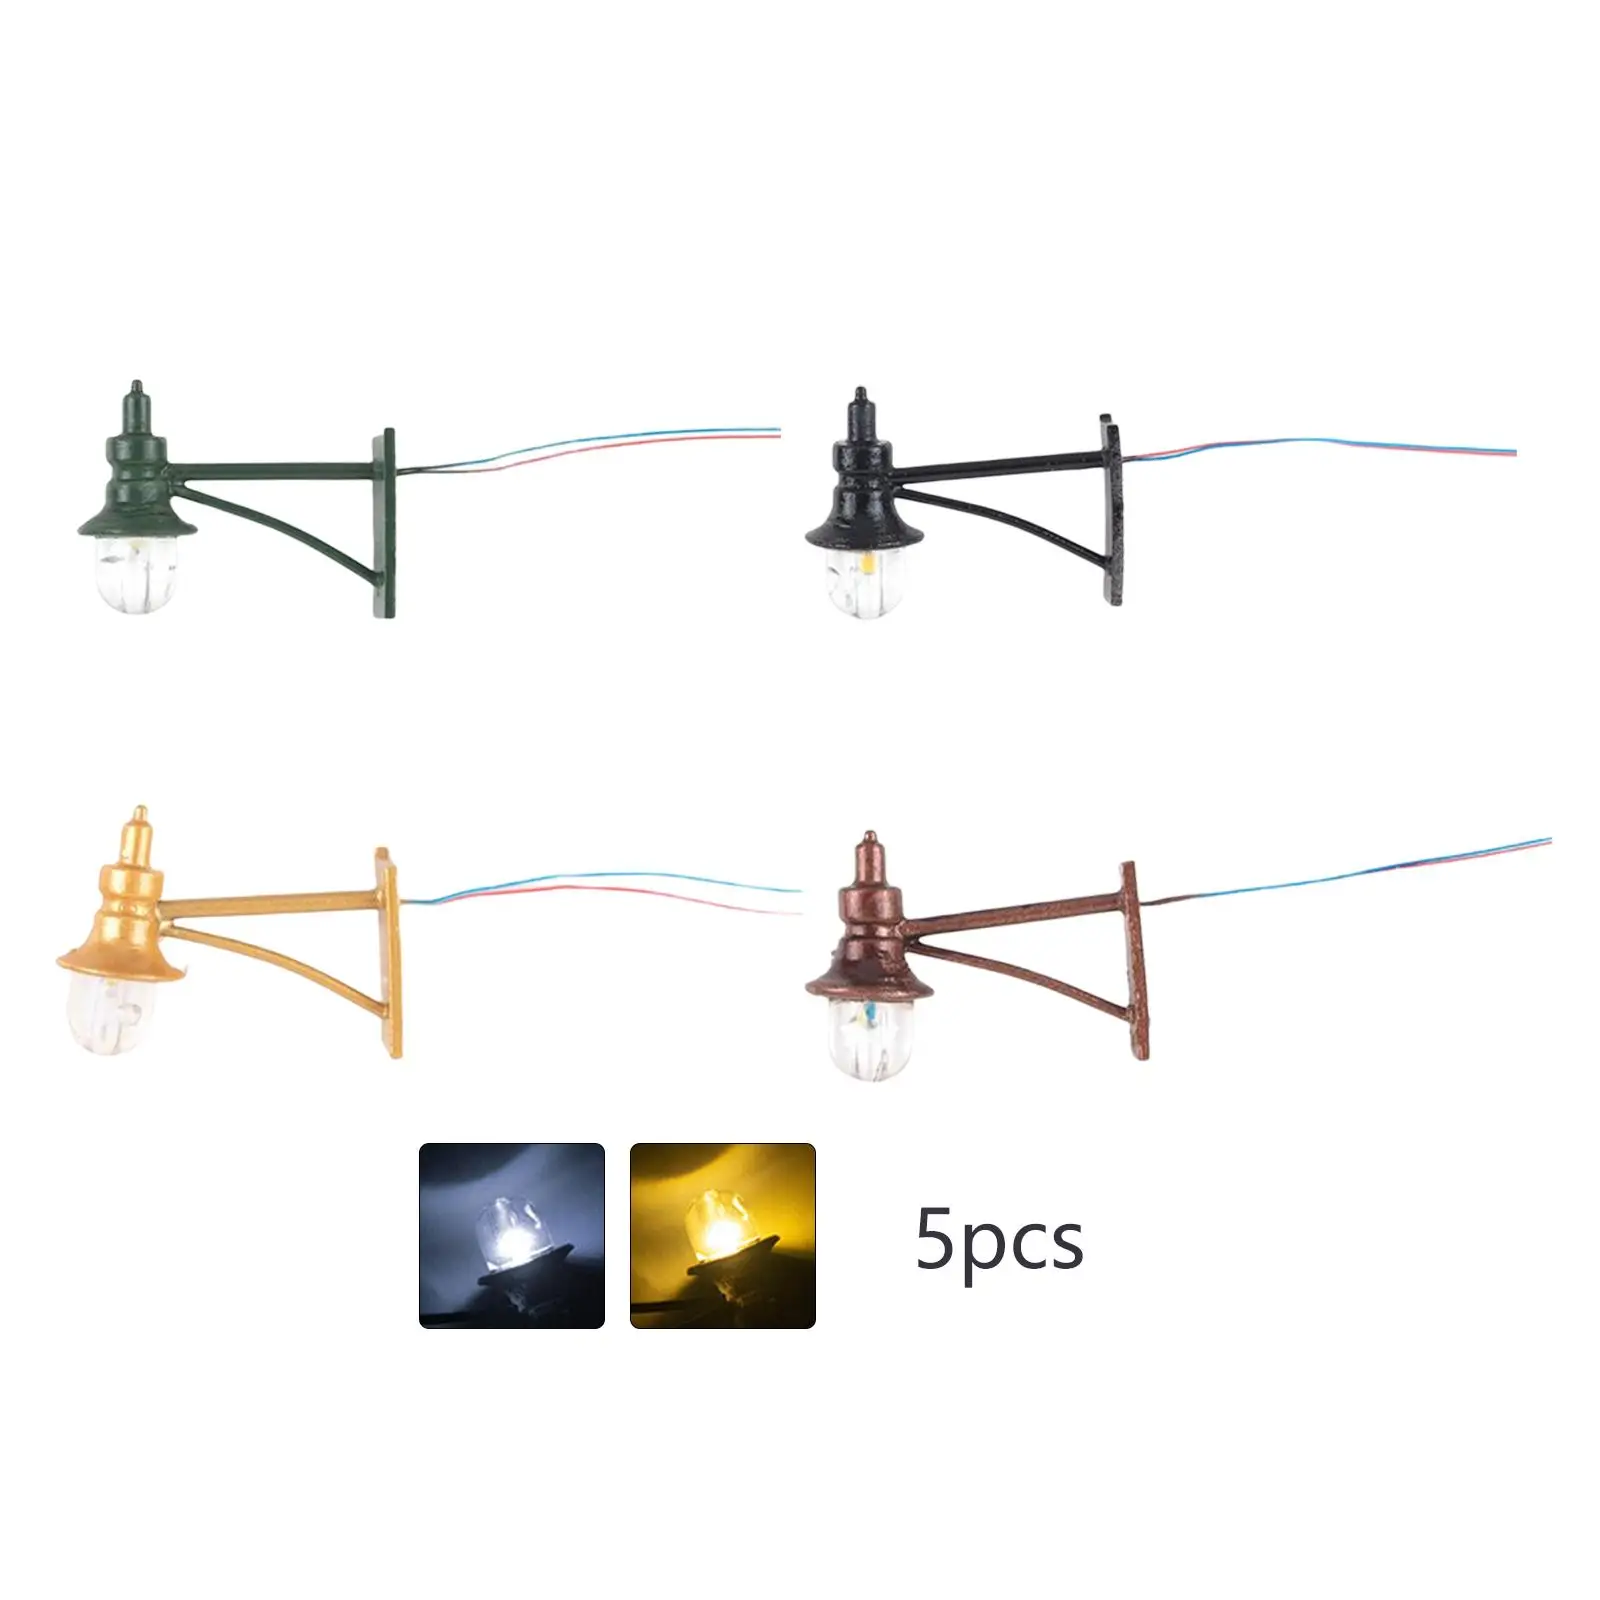 5 Pieces 1:87 Hanging Lamp Ornament Street Lights for Building Sand Table